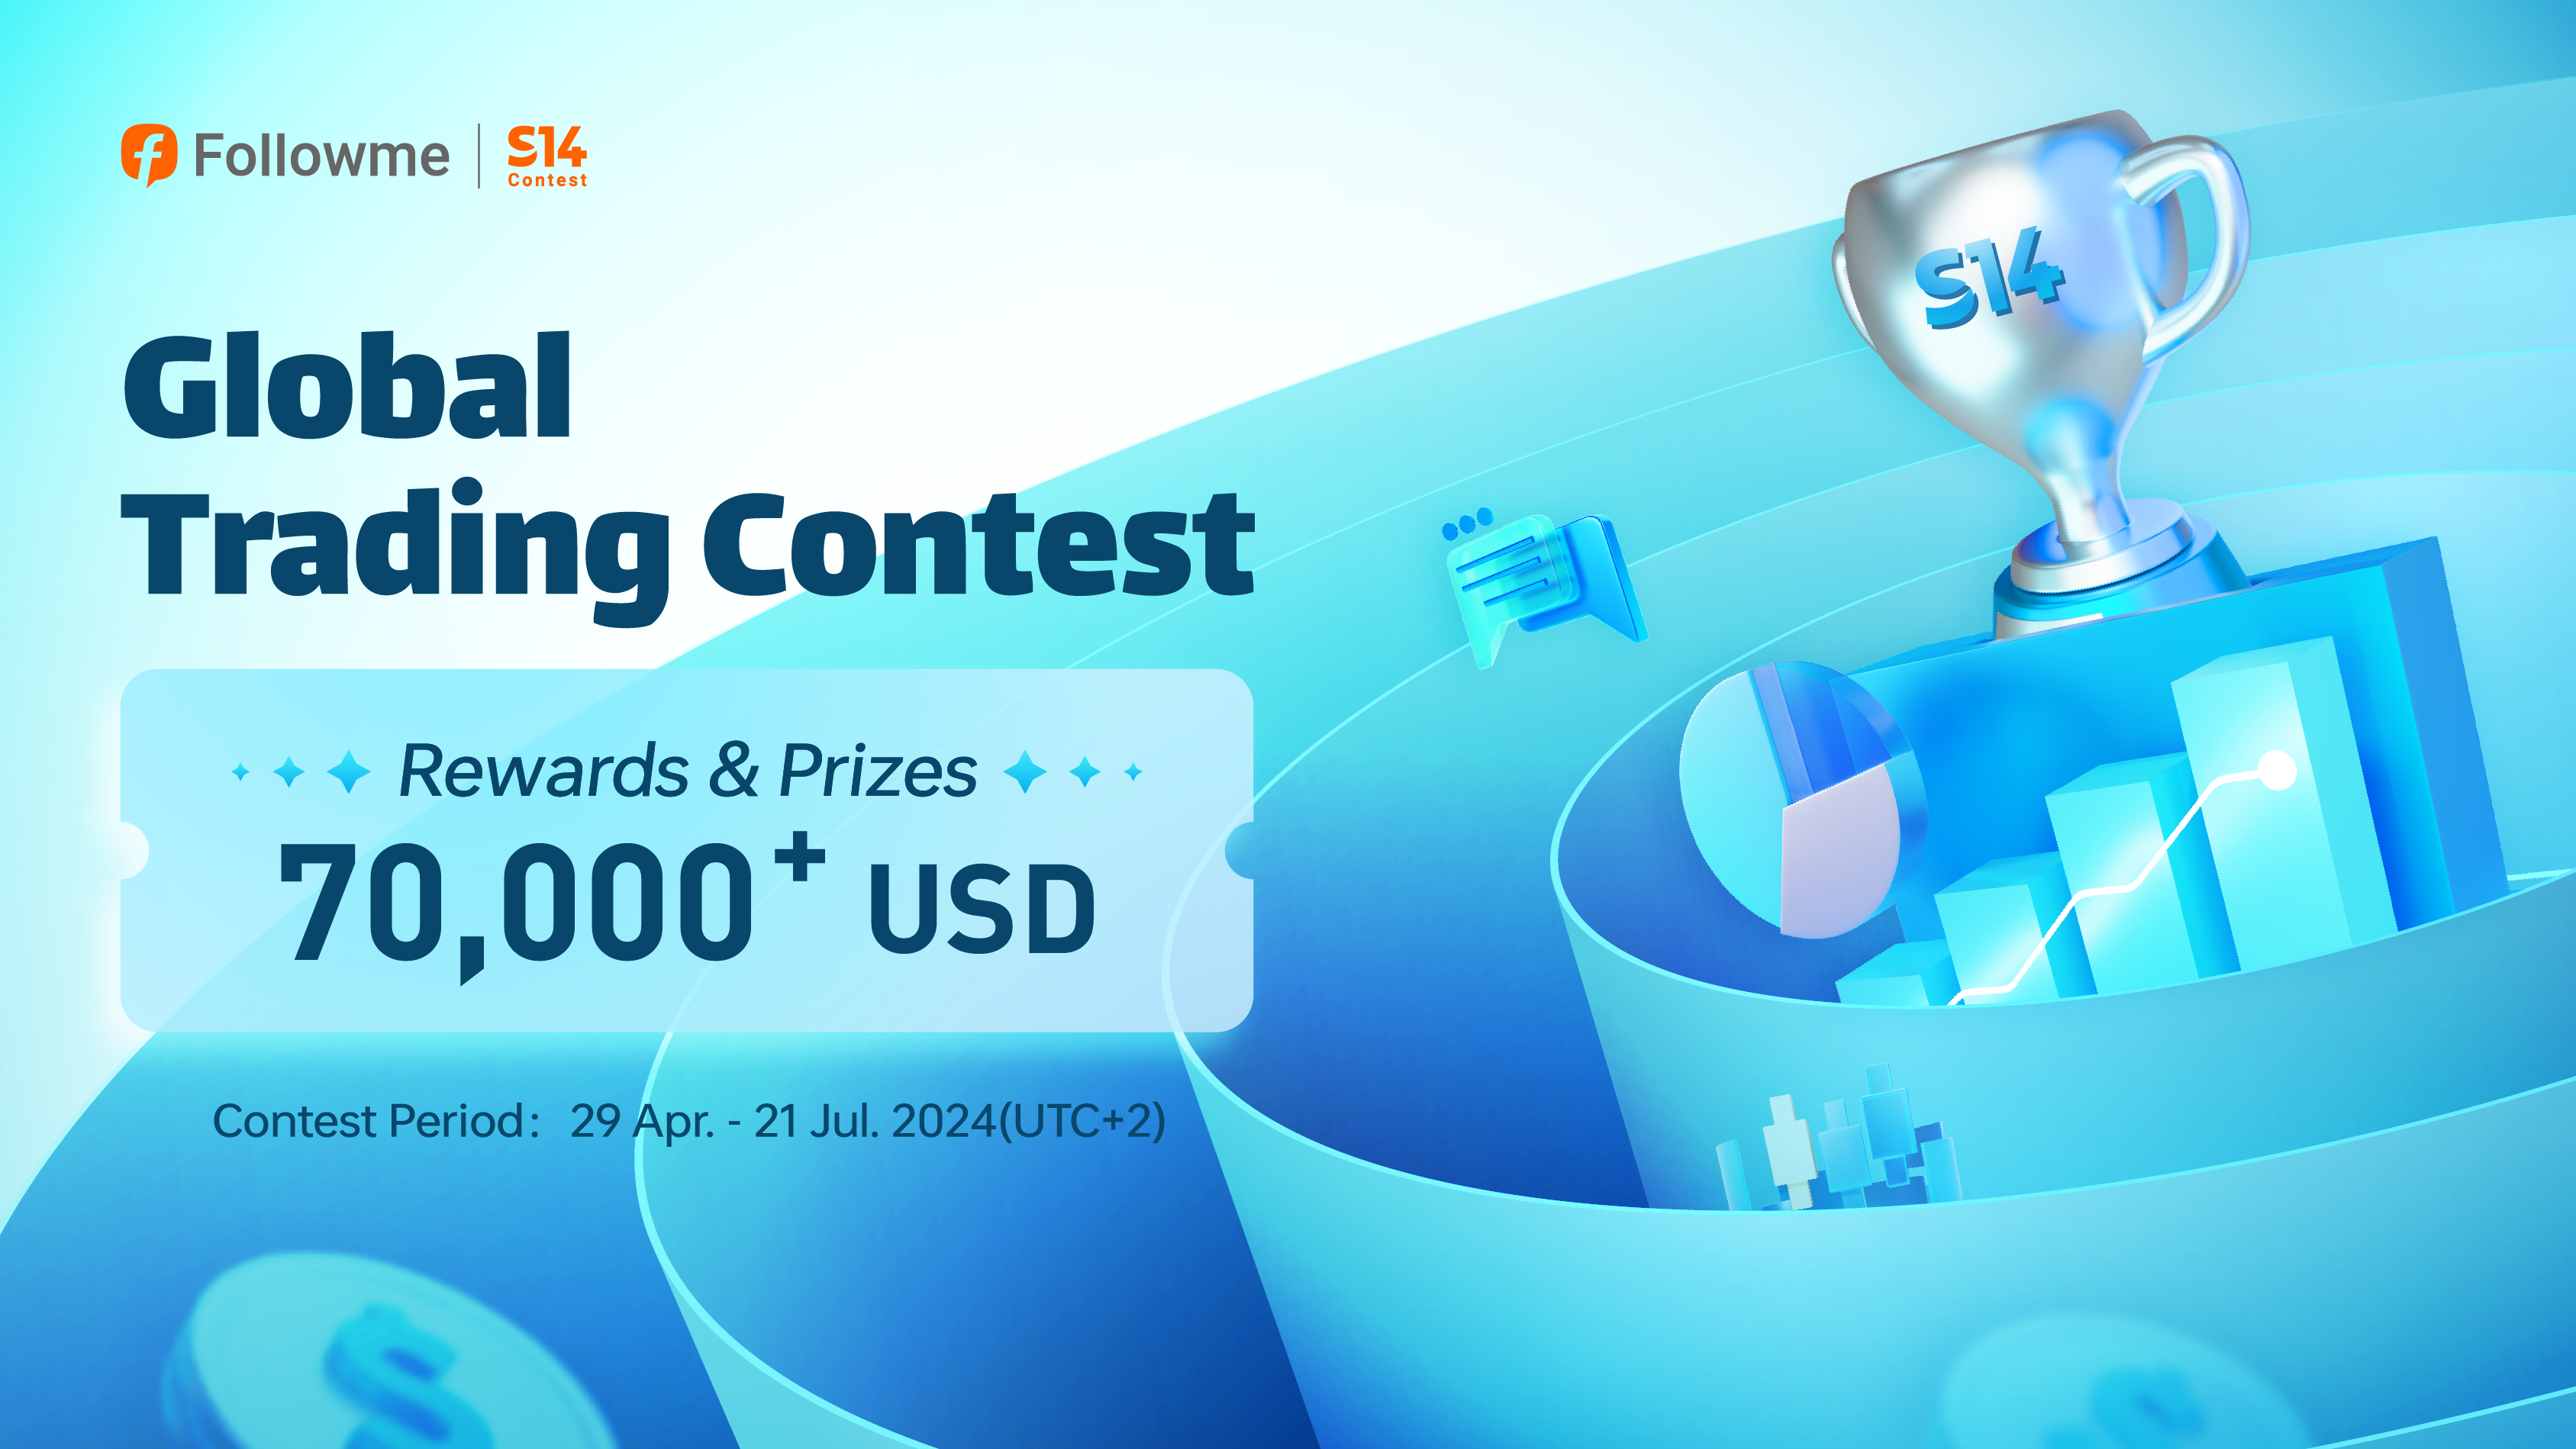 S14 FOLLOWME Global Trading Contest Begins | Join Now to Compete for the Ultimate Grand Prize